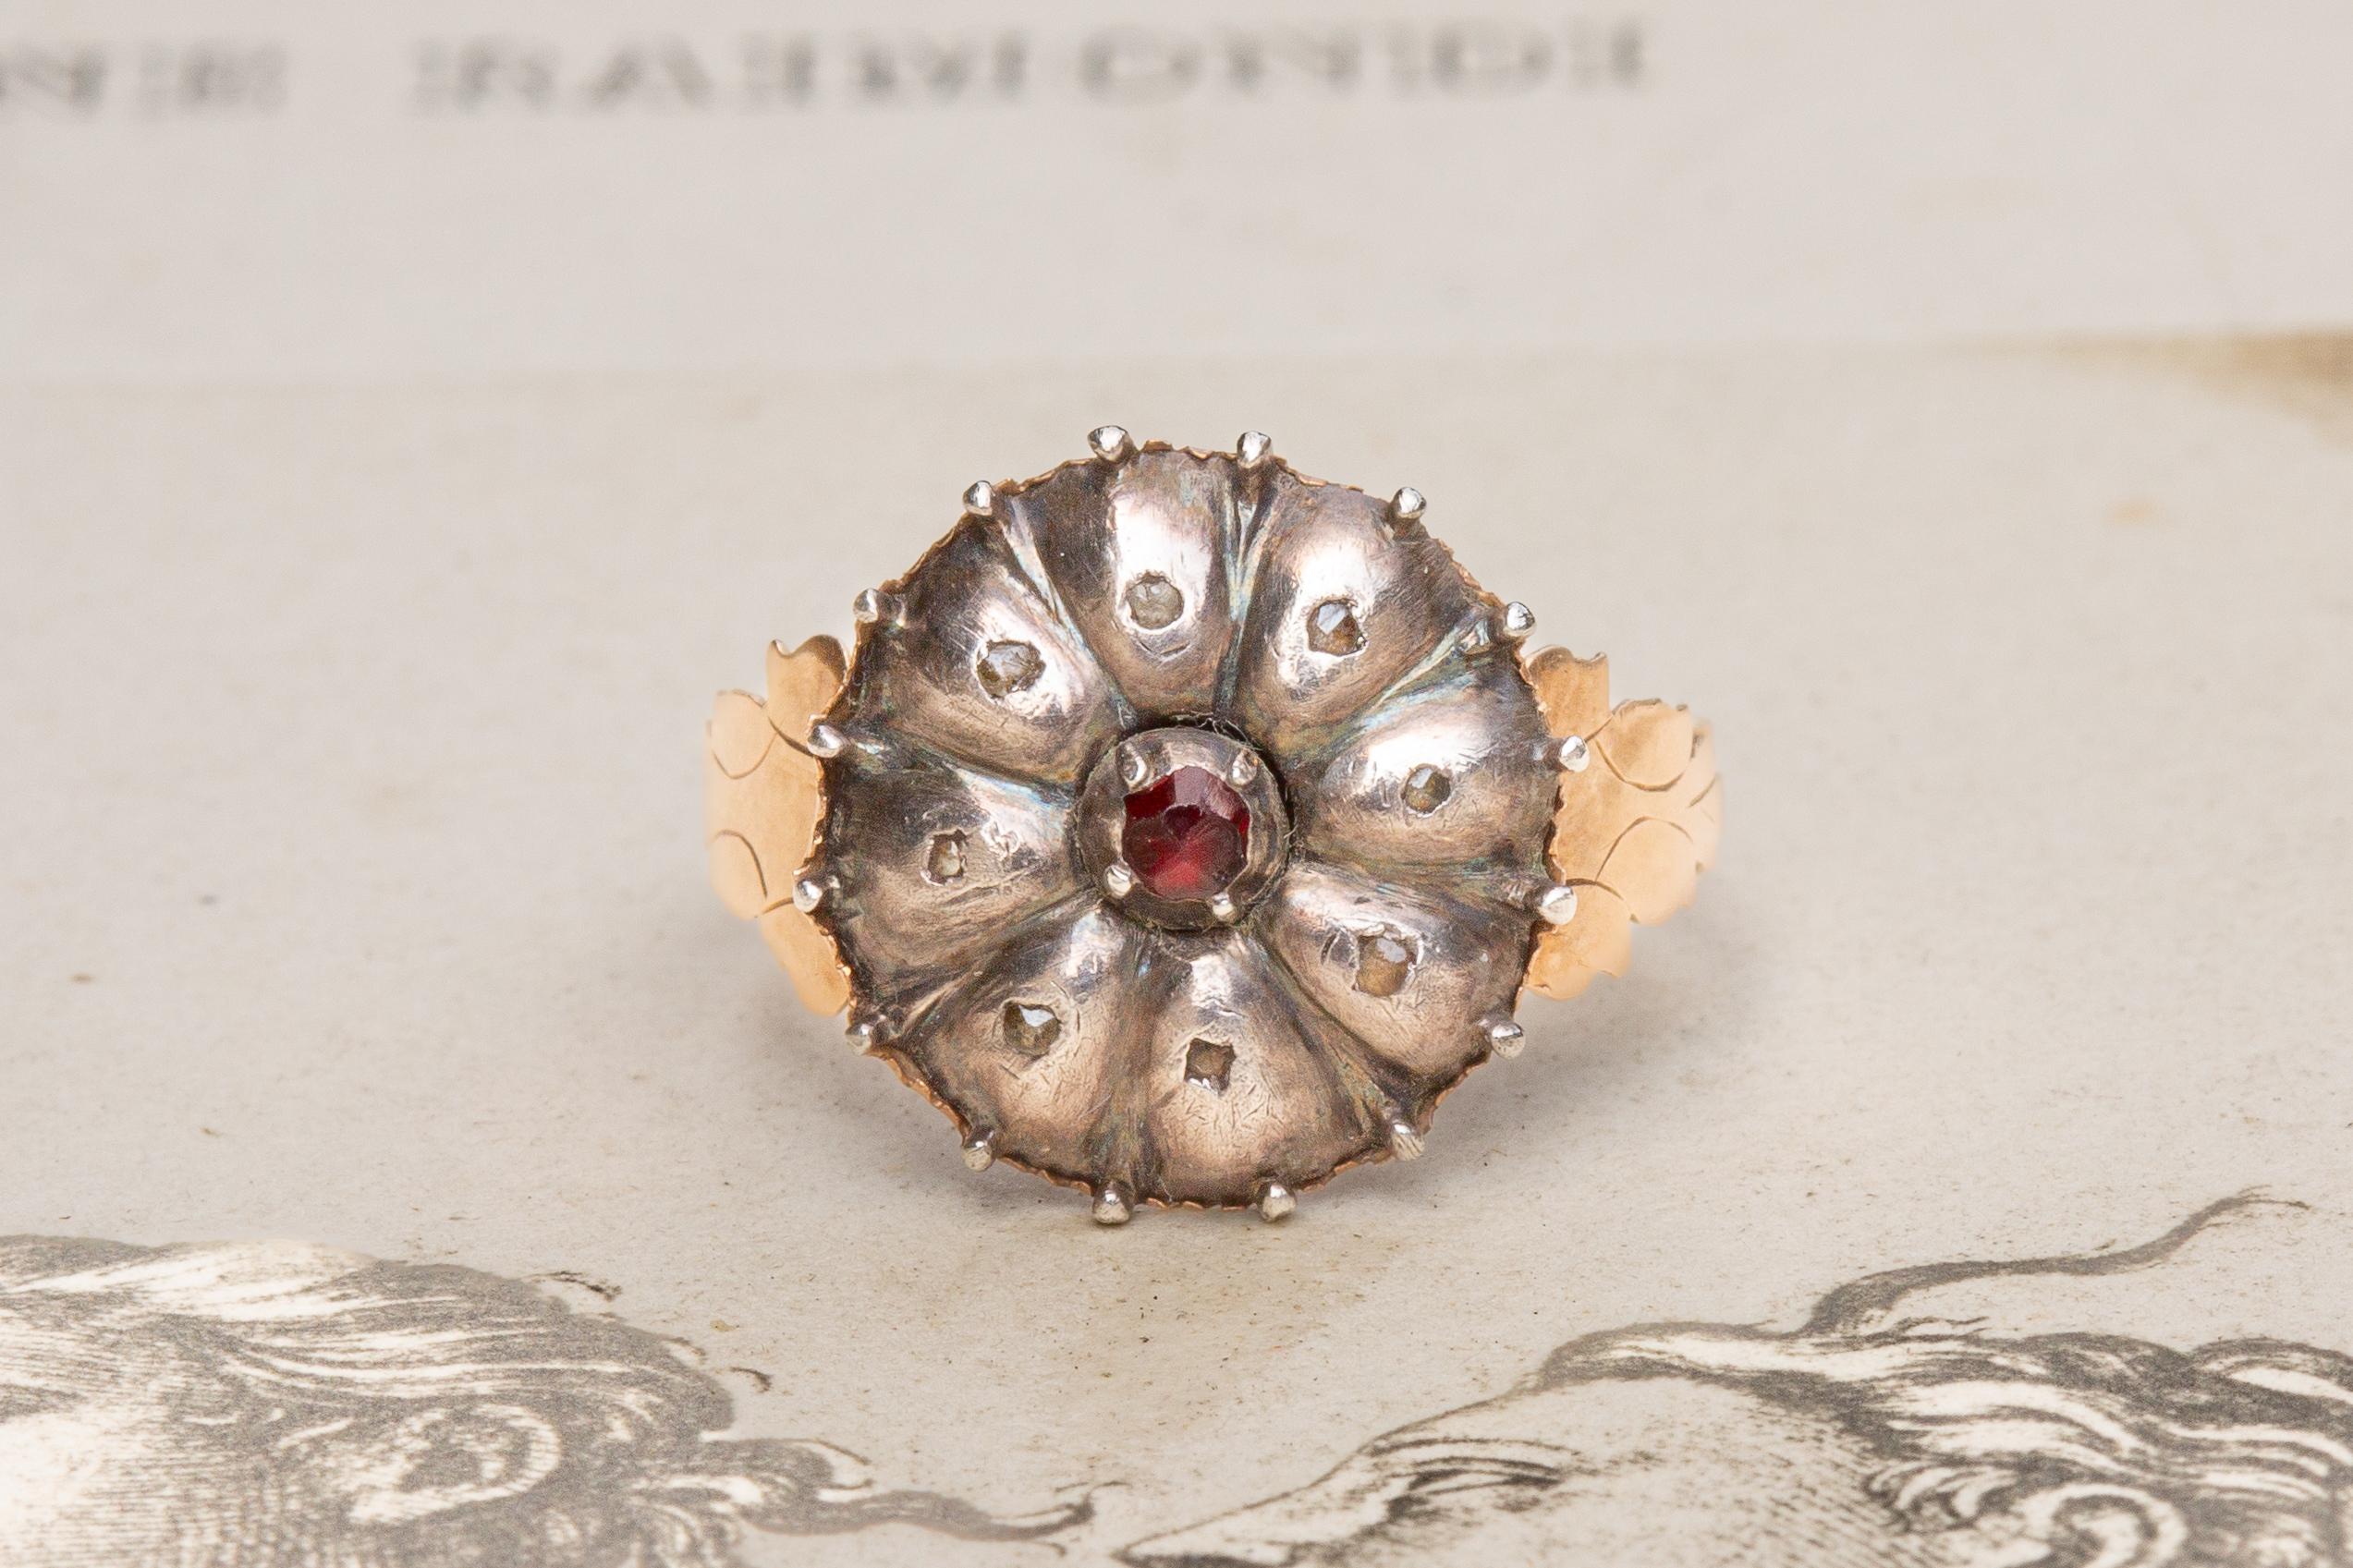 This lovely antique cluster ring dates to around 1800 and was made in either Southern Germany or Italy. In the middle of the ring head lies a red garnet, surrounded by a cluster of 8 rose cut white topaz stones in rubover silver settings. 

The